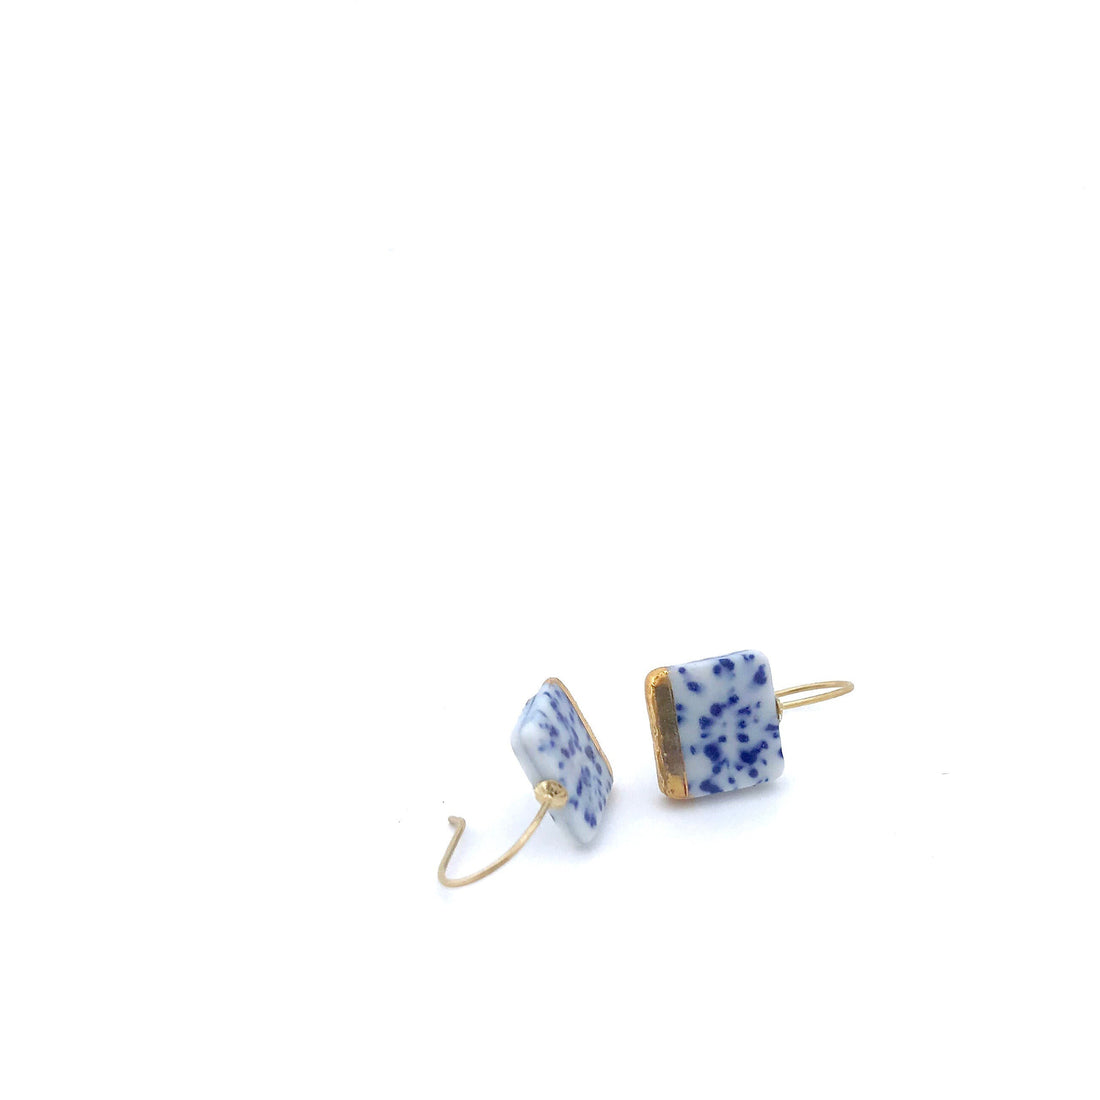 Blue Porcelain square earrings, ceramic jewelry, Delft blue, Slow fashion, 18k solid gold, porzellan schmuck, pottery and ceramic